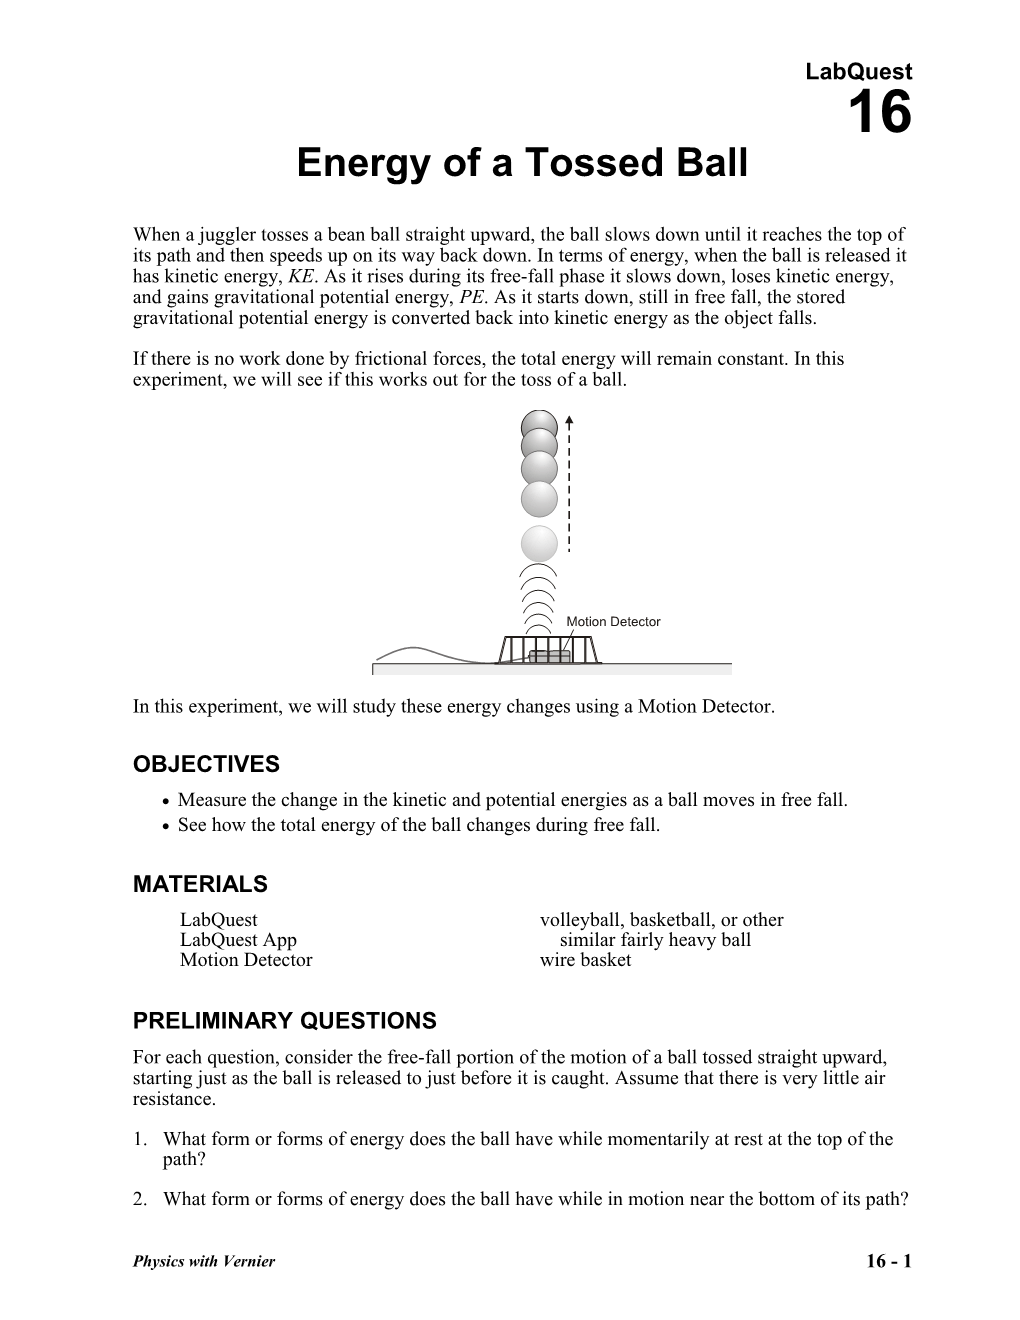 Energy of a Tossed Ball